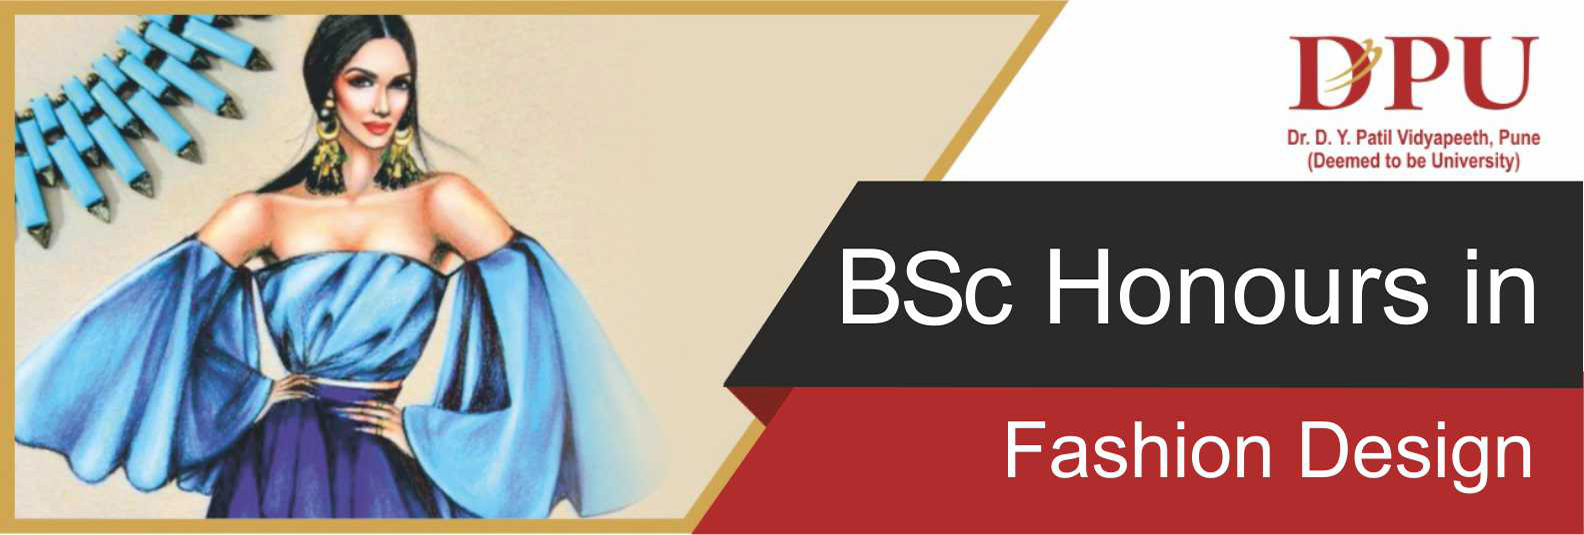 Bachelor in Science Honours in Fashion Design | B. Sc. Honours in Fashion Design